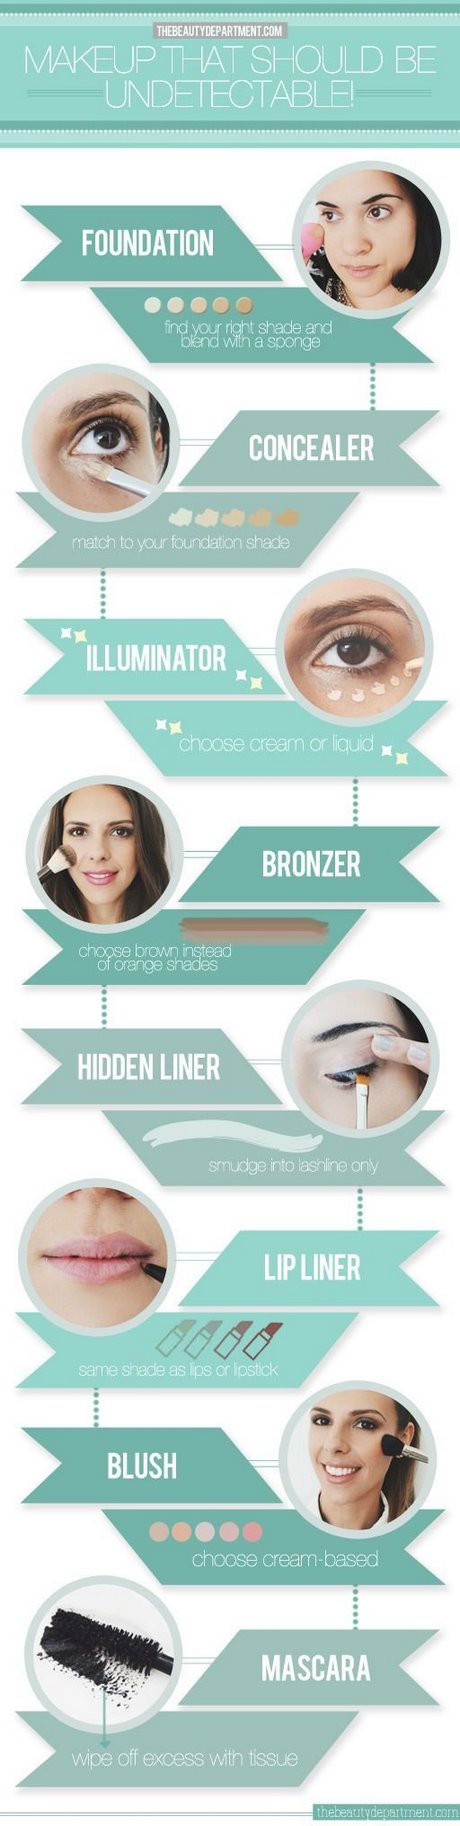 makeup-tutorial-infographic-95_12 Make-up tutorial infographic